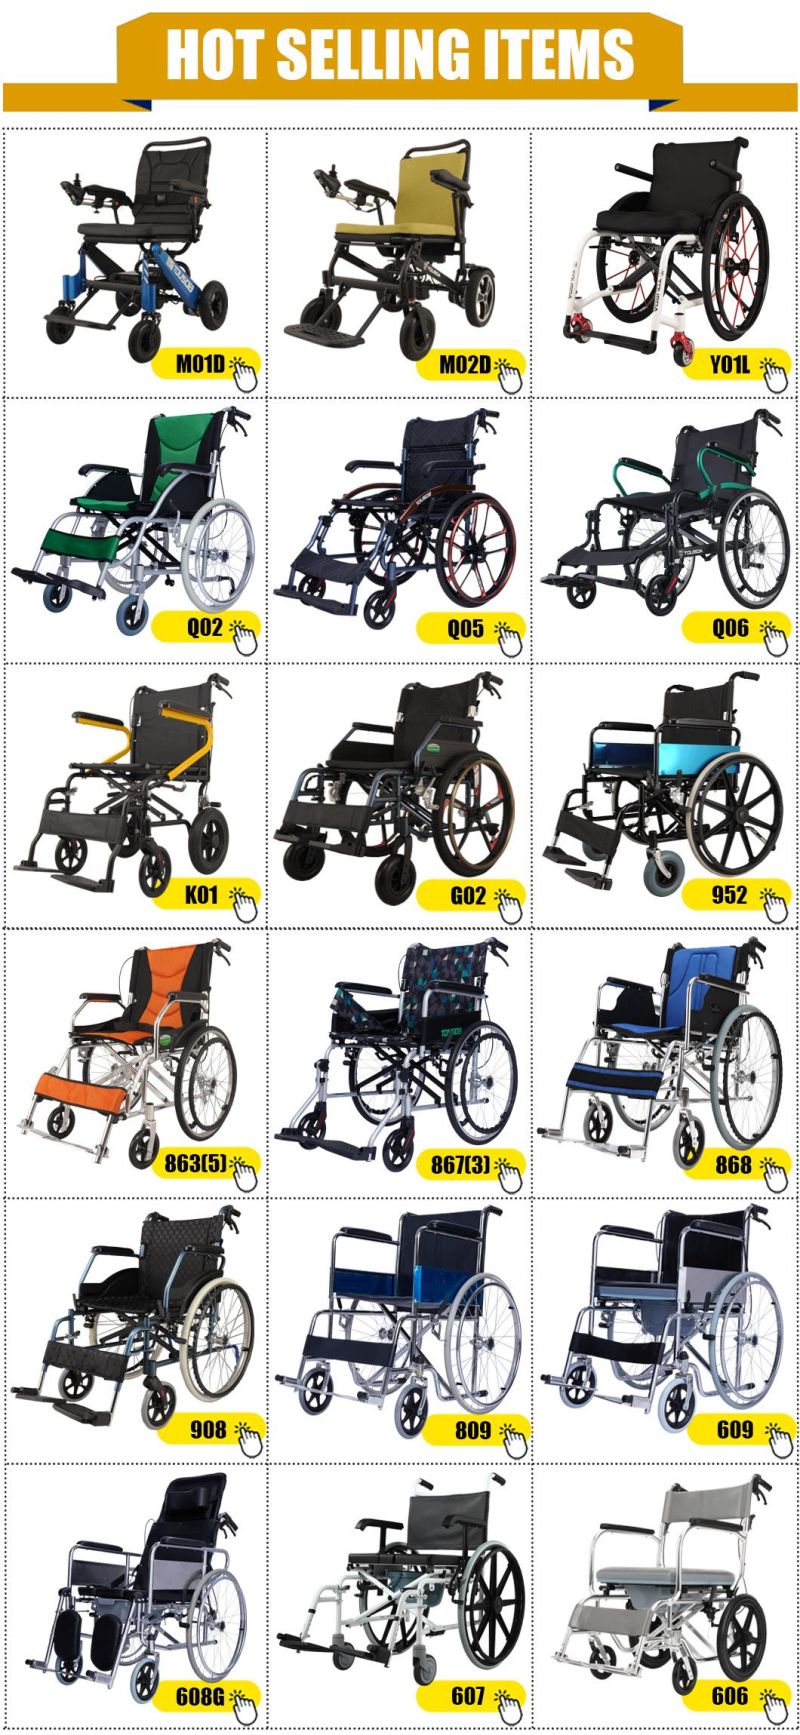 Cushions Folding Indoor/Outdoor Disabled Power Wheelchair